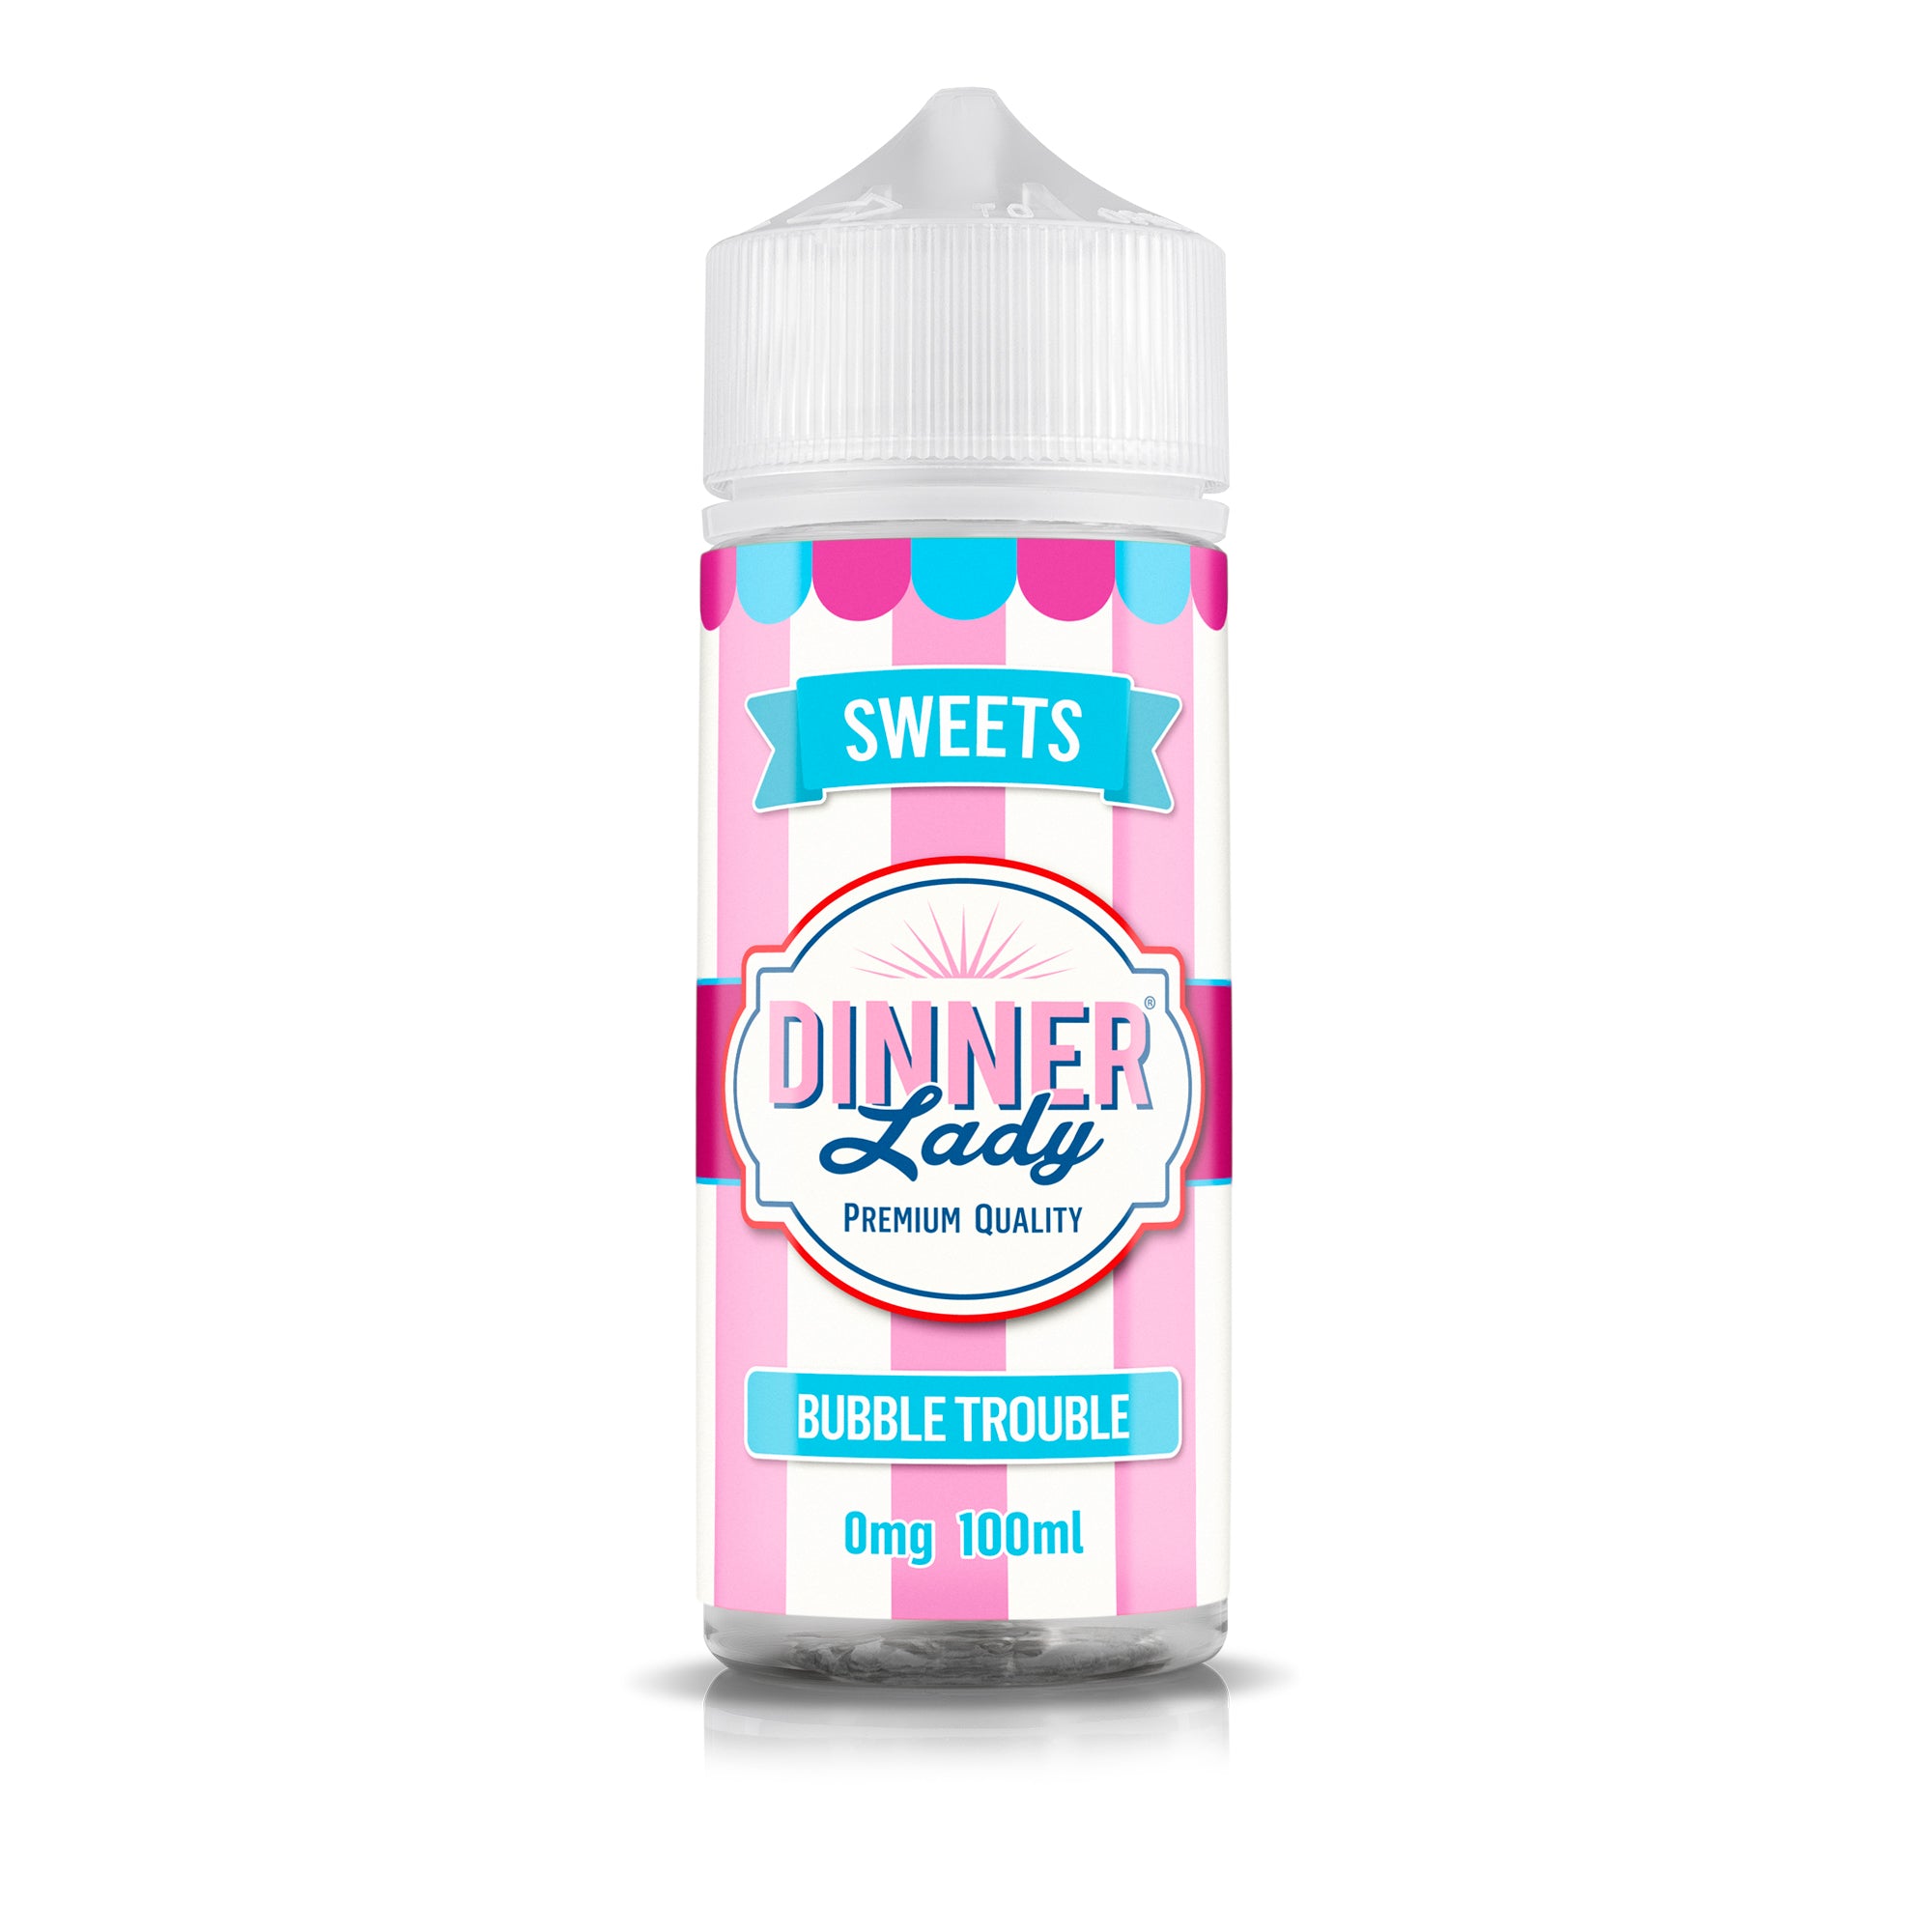 Dinner Lady | 100ml | Sweets | Bubble Trouble | Wholesale